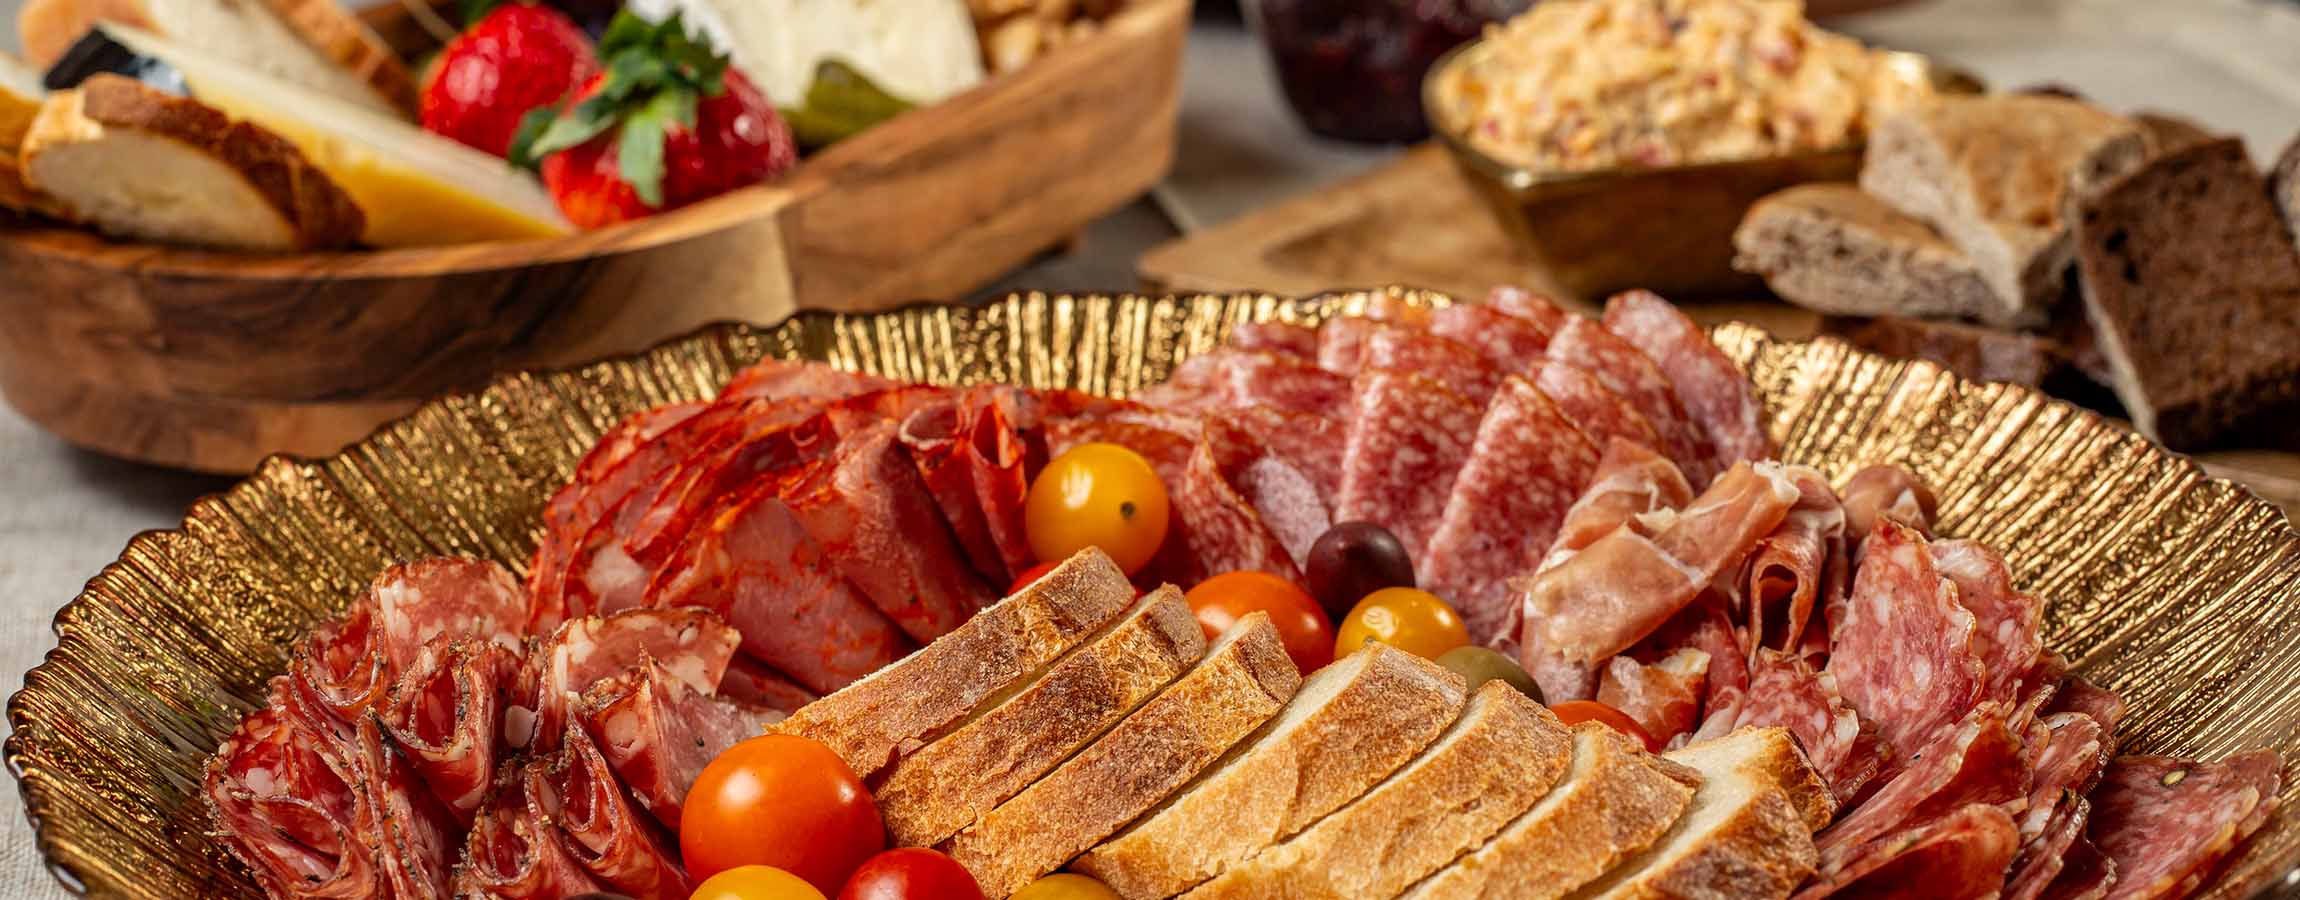 Array of sliced deli meat, bread and tomatoes in a decorative bowl.